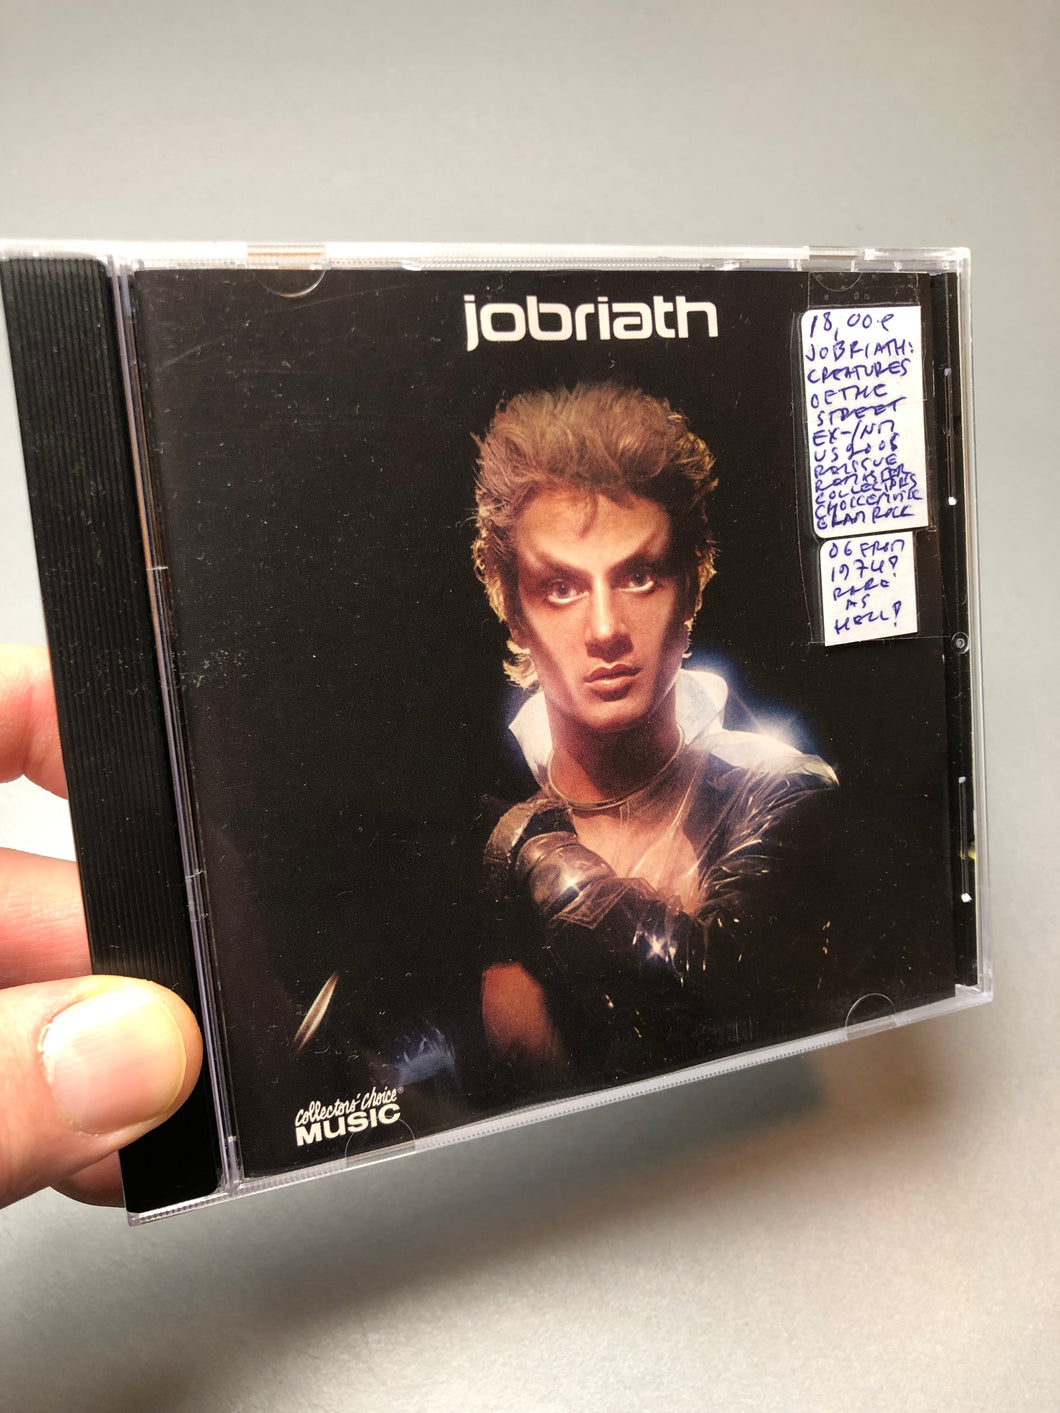 Jobriath: Creatures Of The Street, reissue, remastered, US 2008